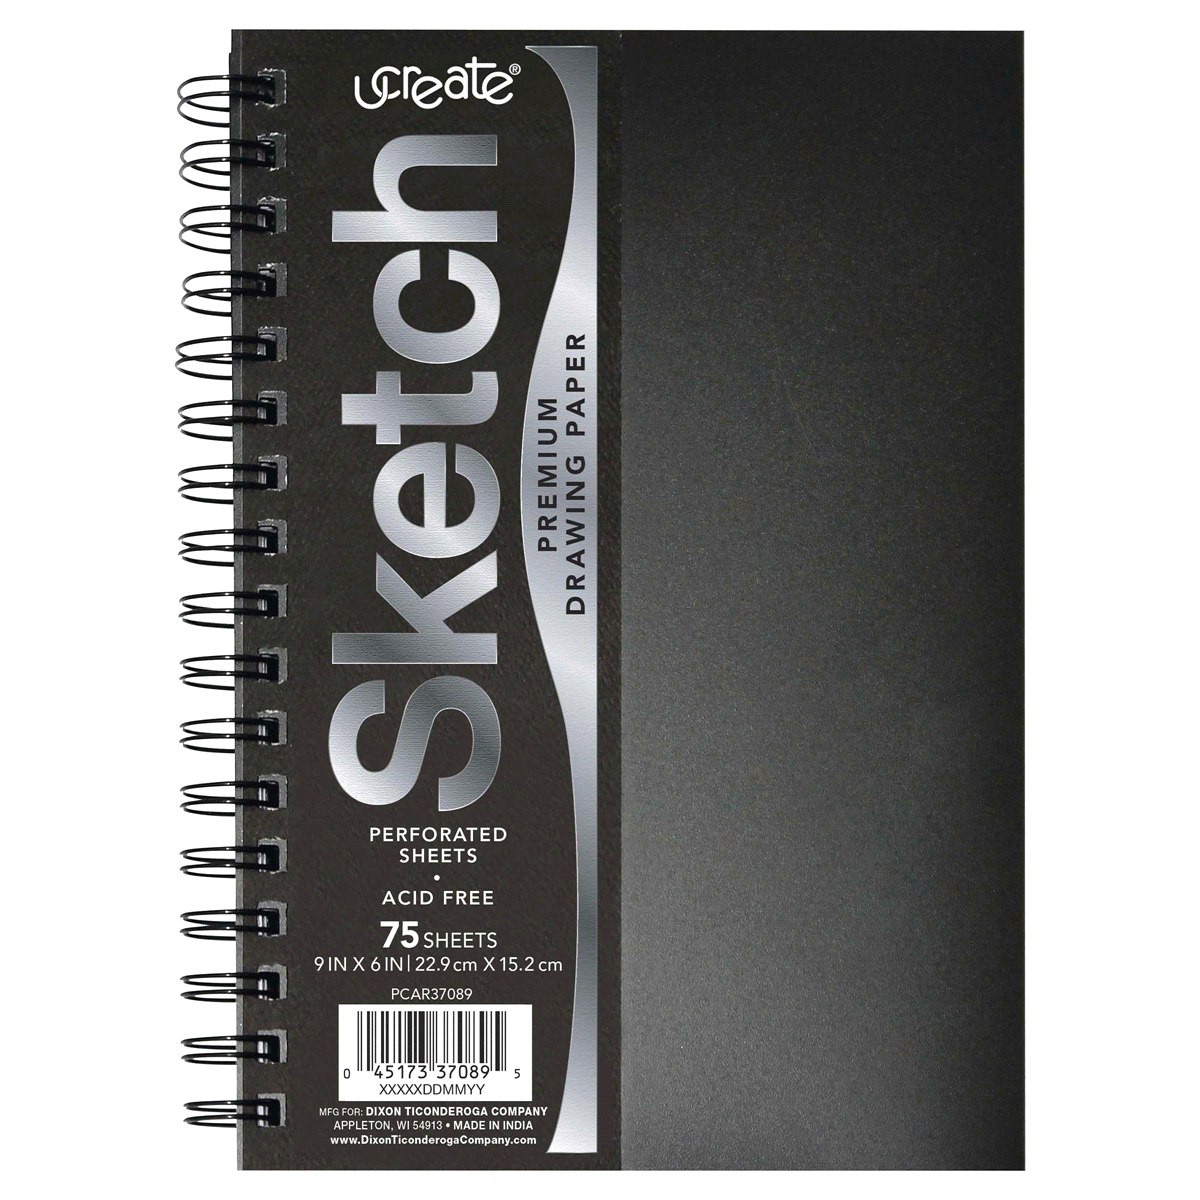 slide 1 of 1, Pacon UCreat Poly Cover Sketch Book, 75 ct